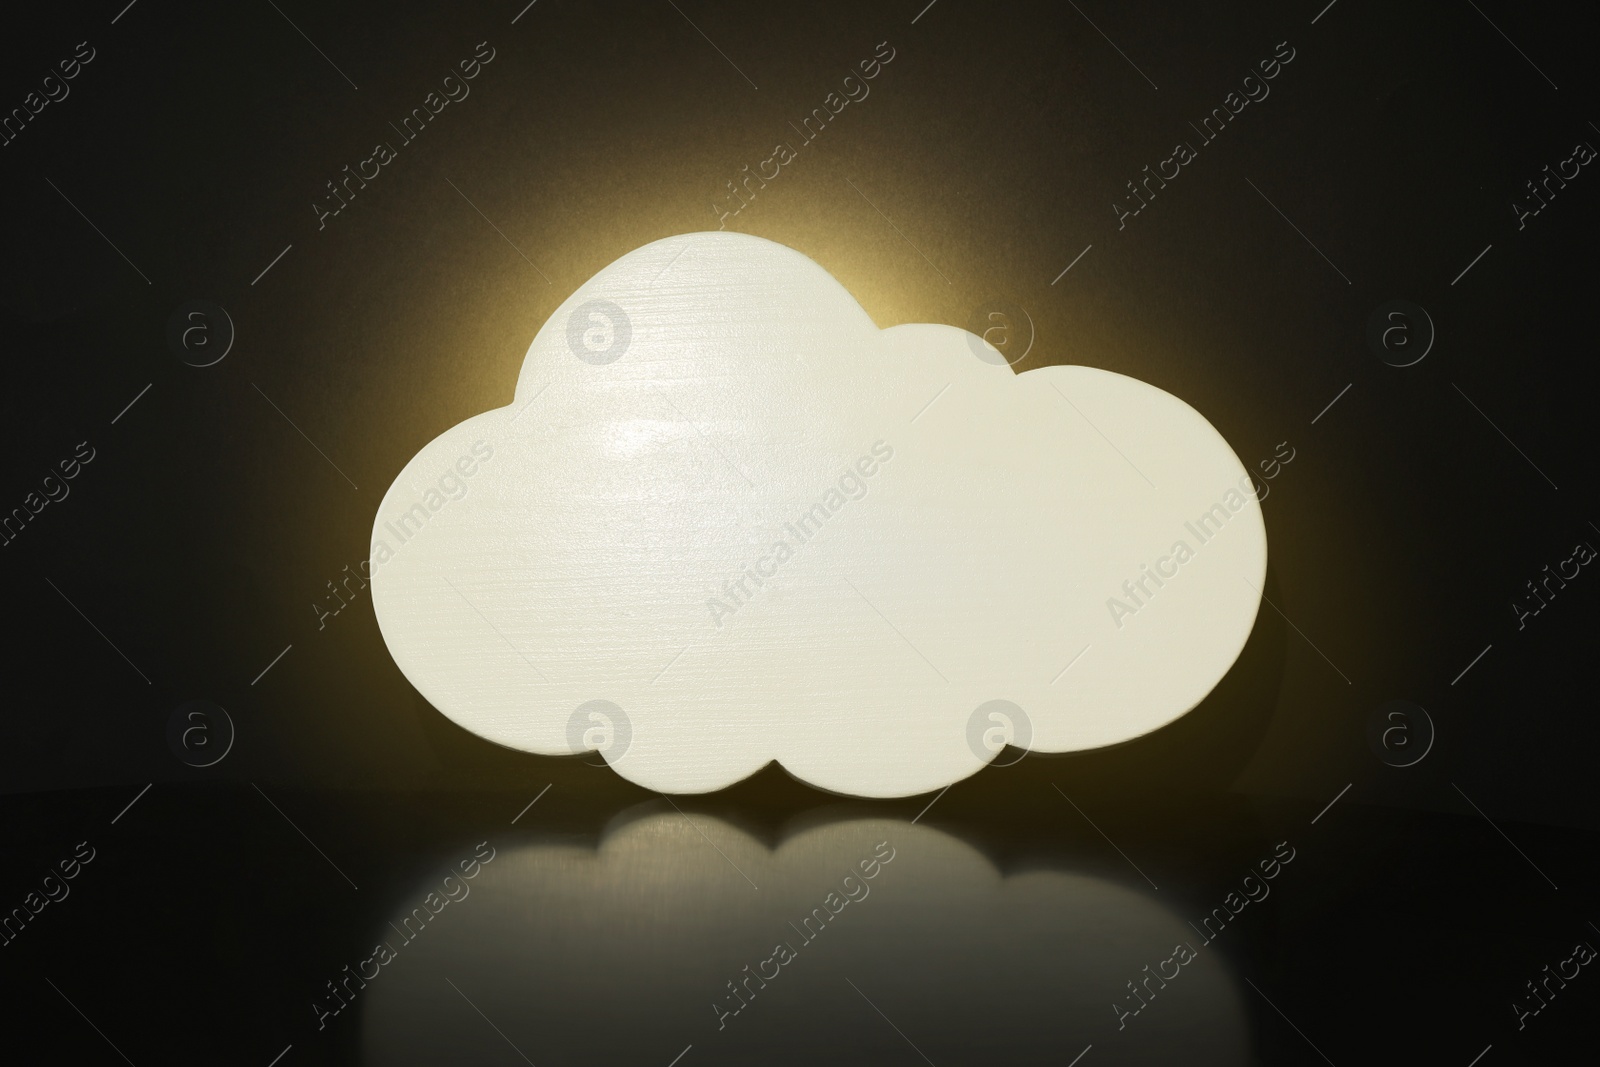 Photo of Cloud shaped glowing night lamp on black background